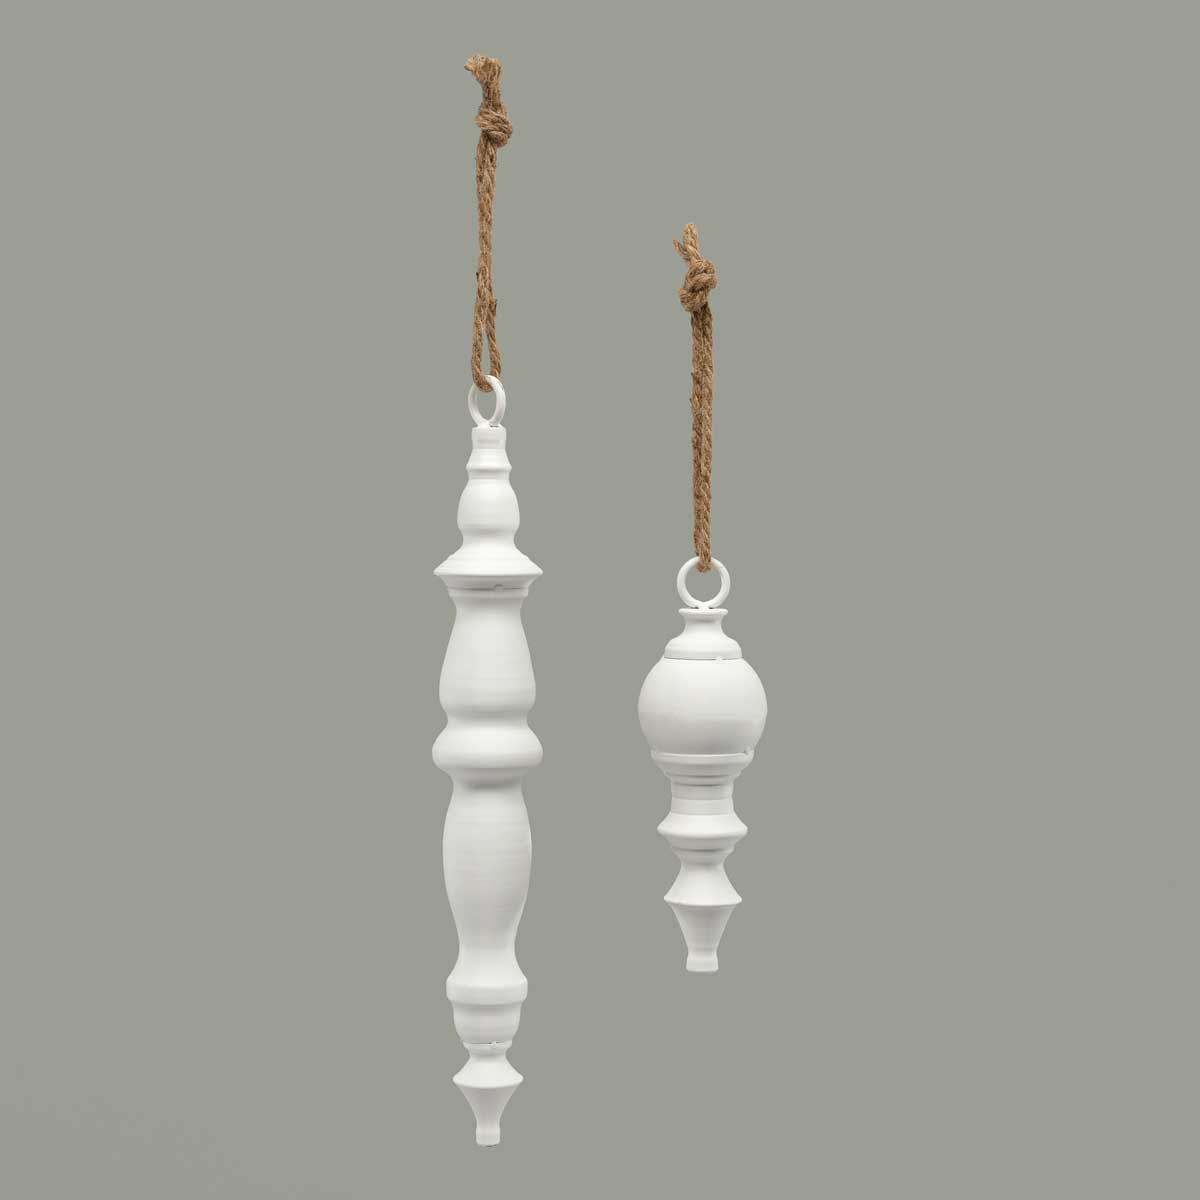 ORNAMENT FINIAL MATTE WHITE LARGE 2.5IN X 16IN METAL - Click Image to Close